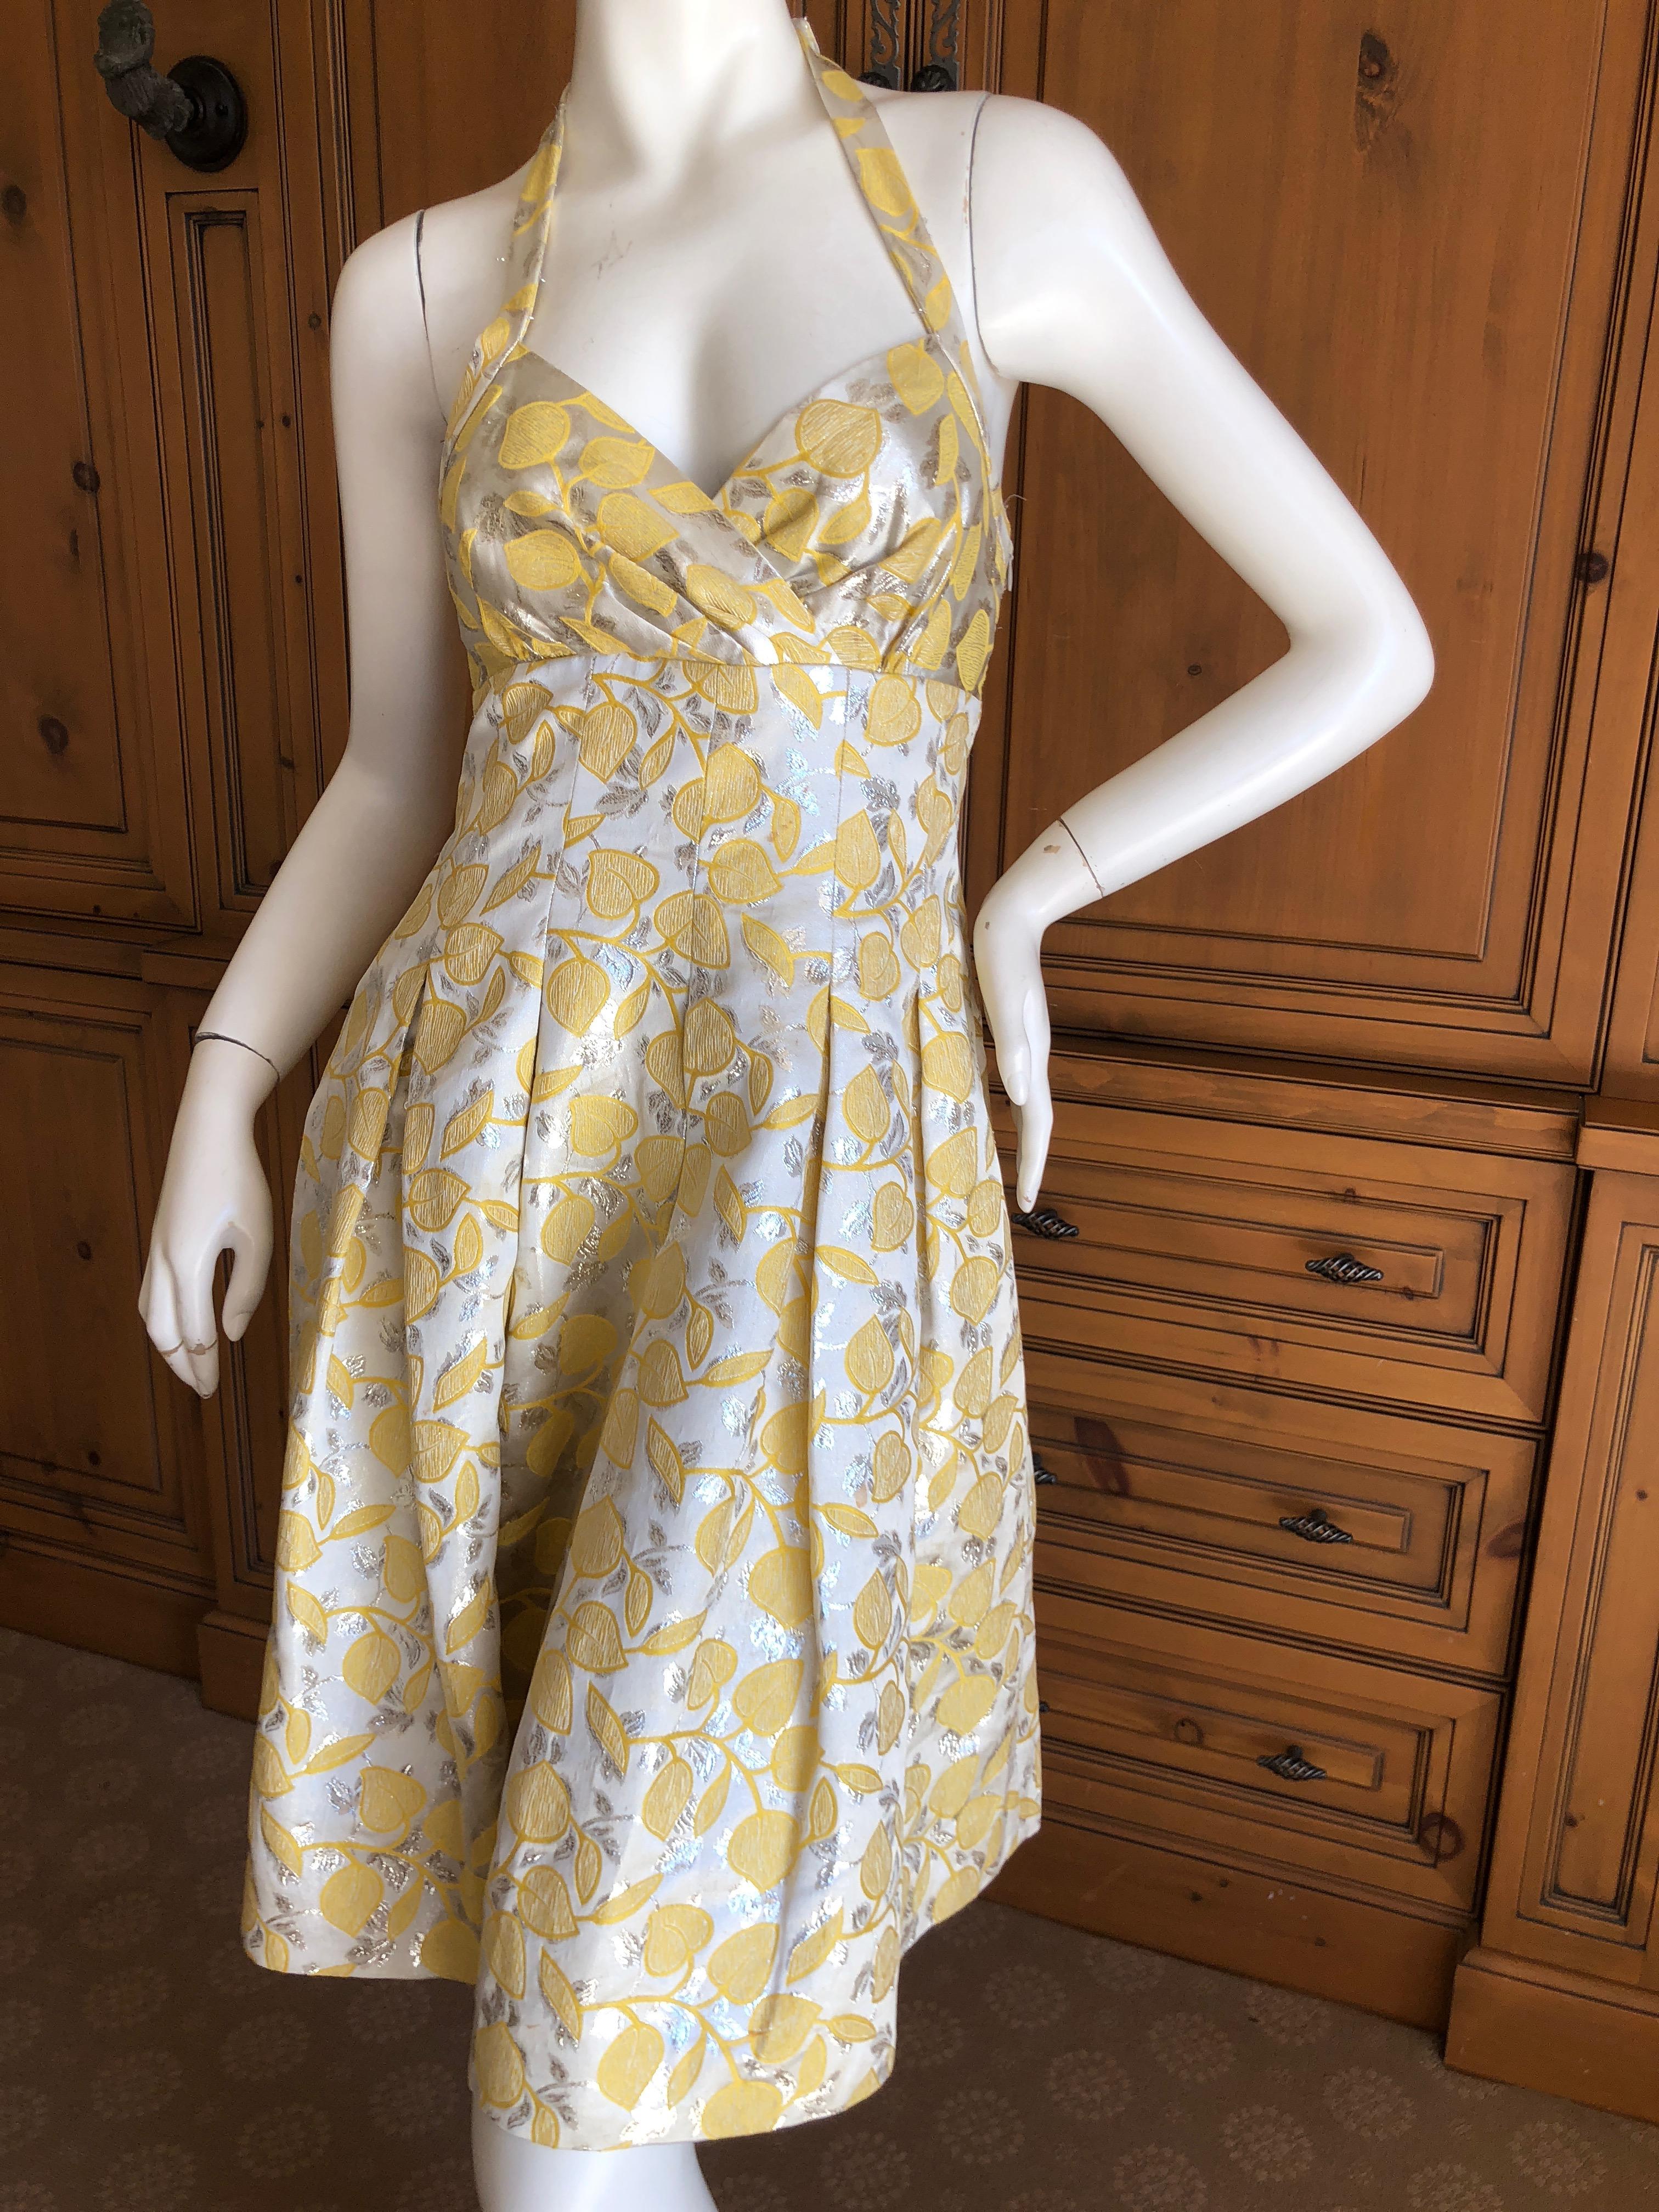 Moschino Cheap & Chic Vintage Silver Brocade Yellow Leaf Pattern Cocktail Dress In Excellent Condition For Sale In Cloverdale, CA